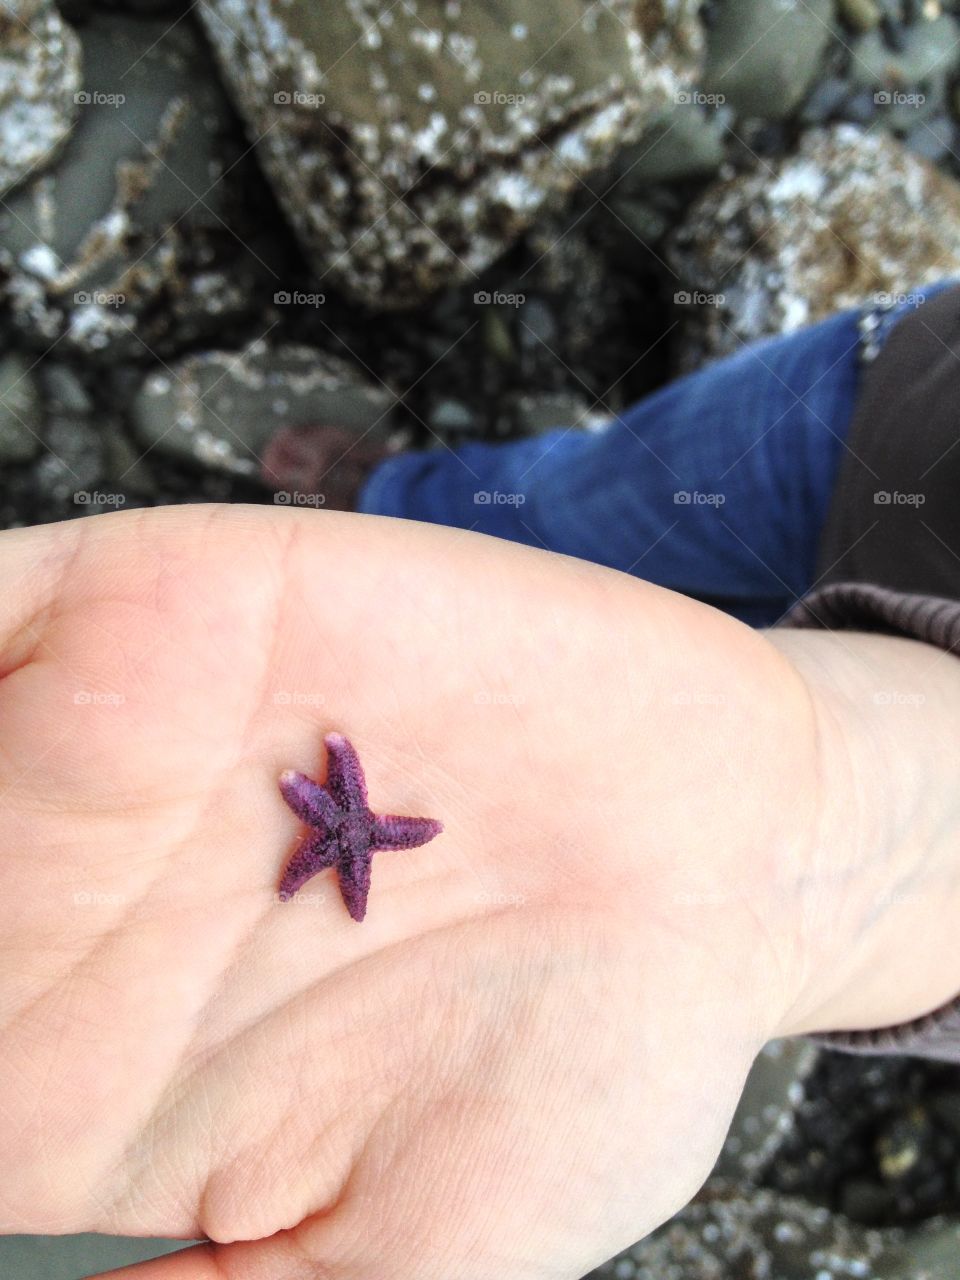 Tiny Starfish. This little fellow was found by my wife in a tide pool near Battery Point Lighthouse.